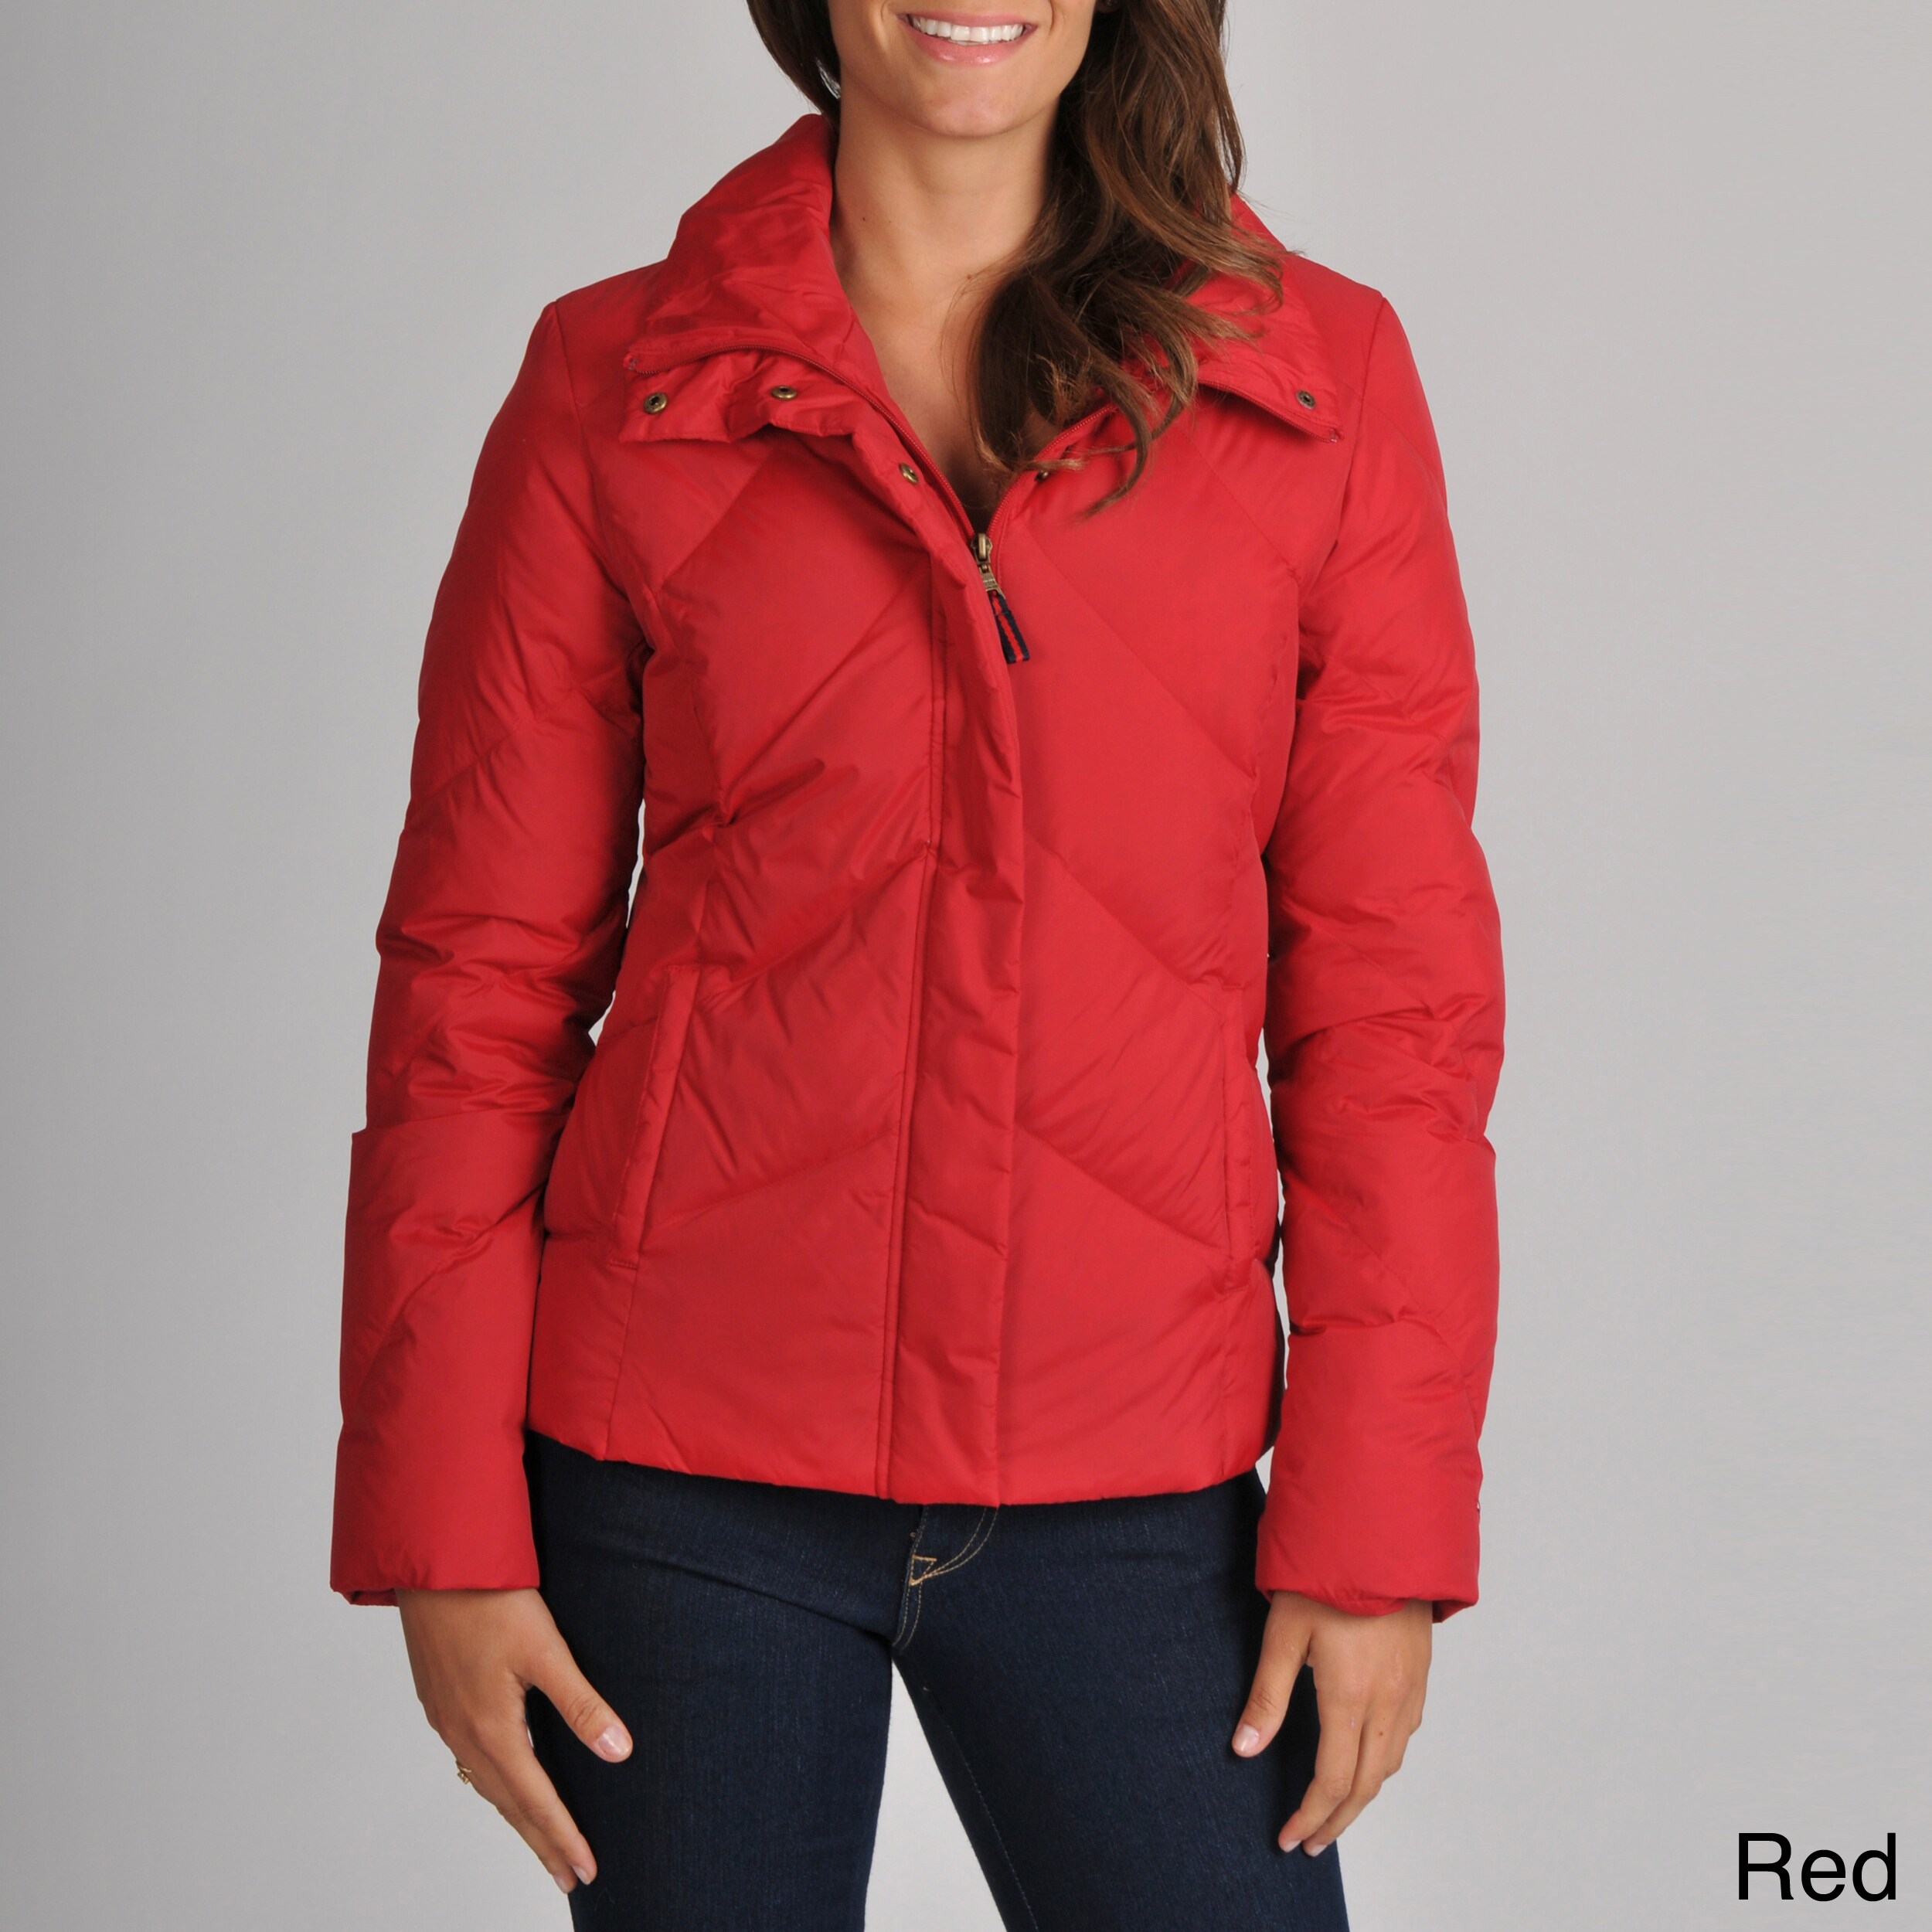 tommy hilfiger women's red down jacket